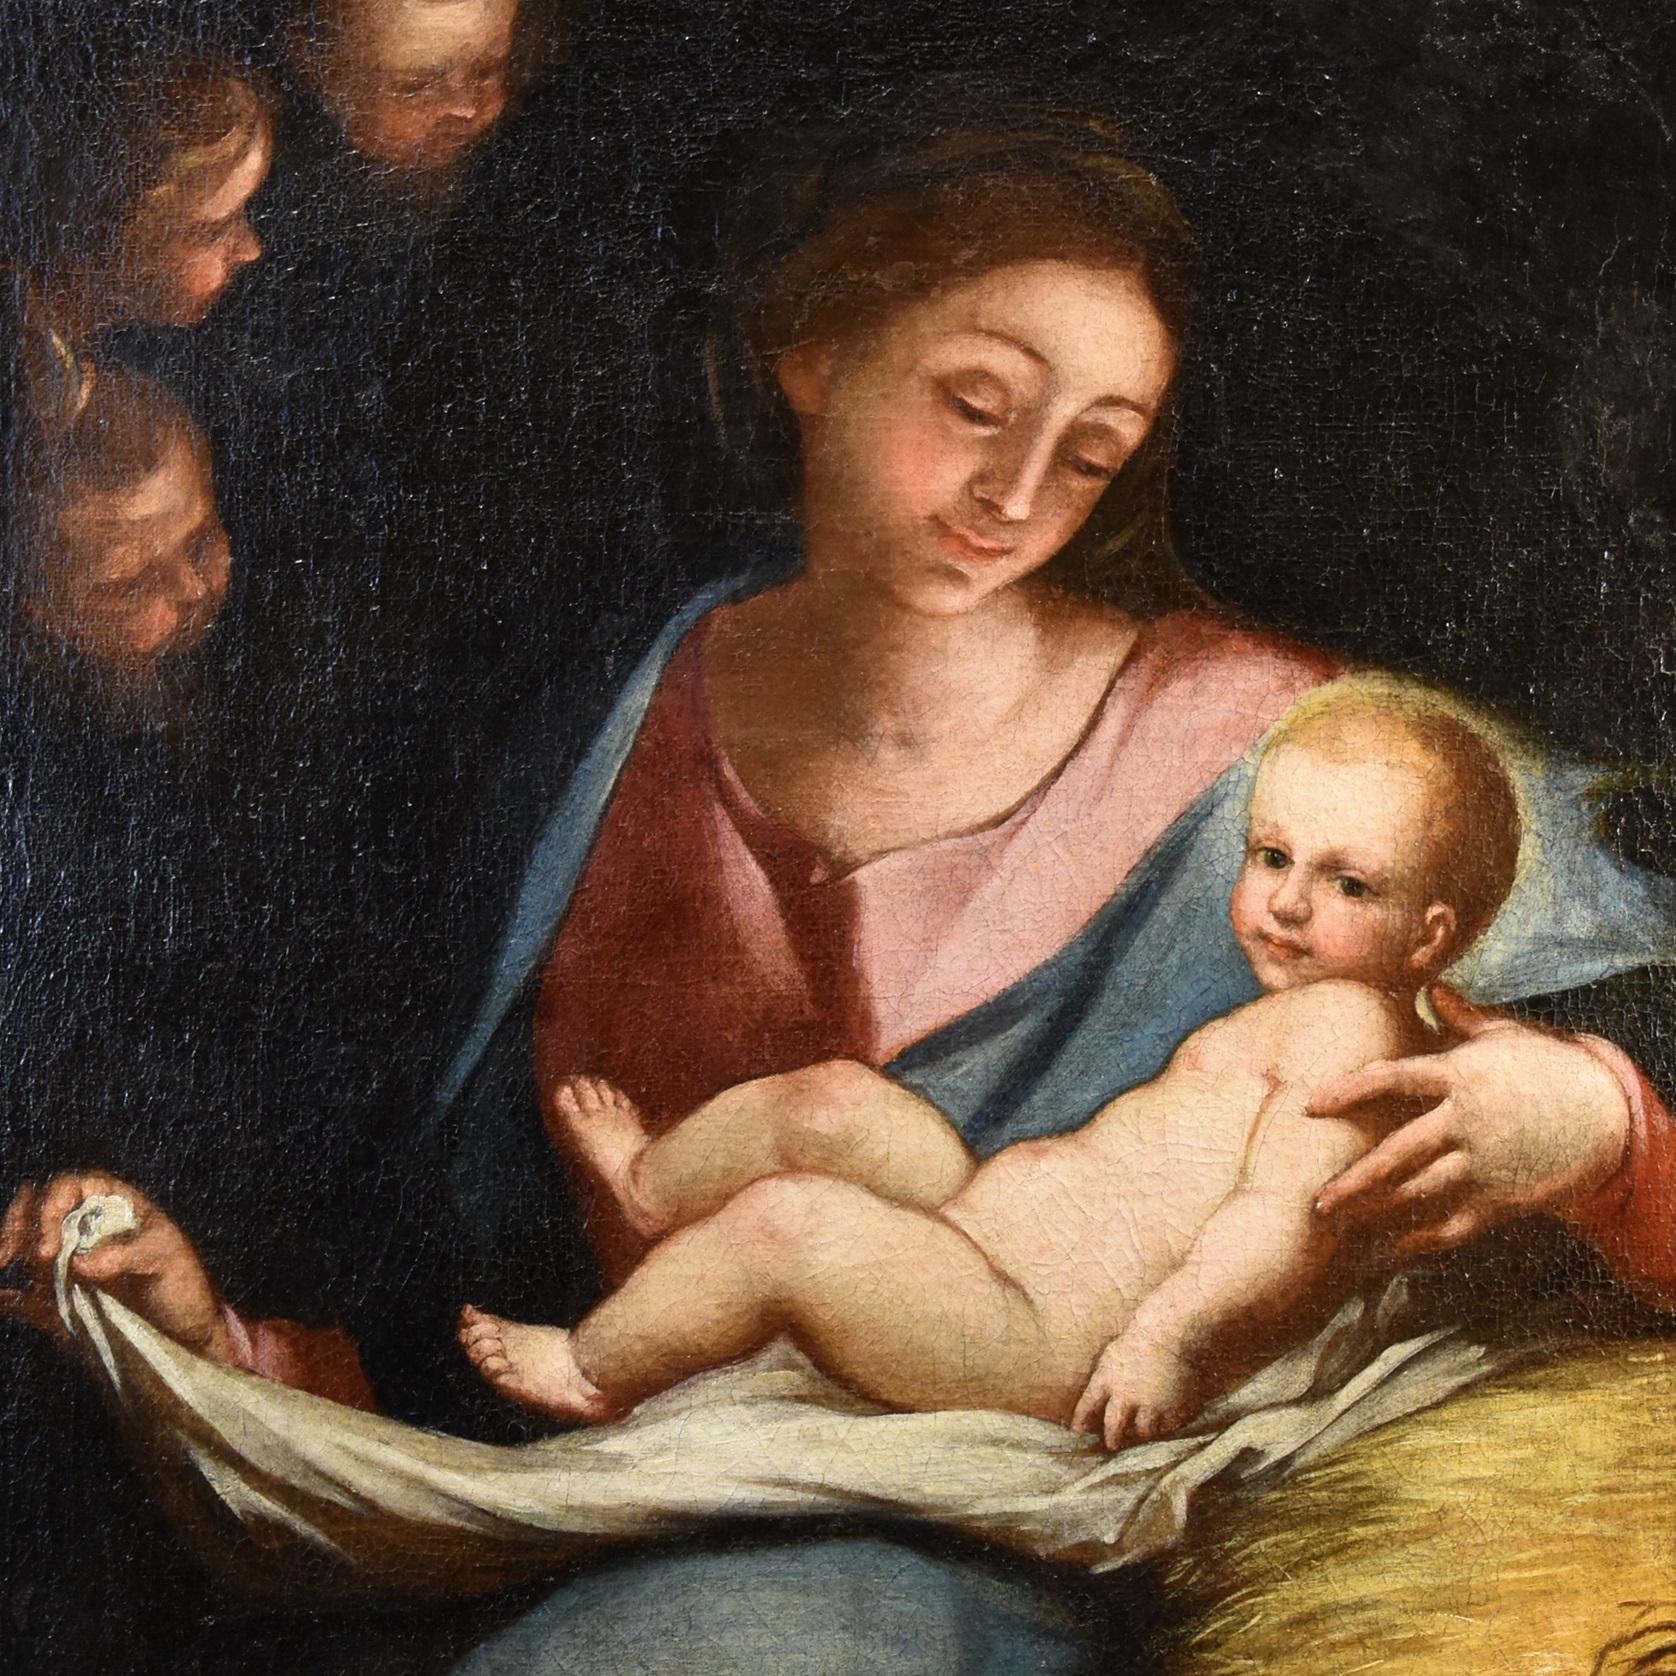 Anton Maria Piola (Genoa, 1654 - 1715) circle
Madonna and Child

Genoese school of the second half of the 17th century

Oil on canvas
93 x 74 cm.- In antique frame 110 x 92 cm.
(Work with expertise by Dr. Arabella Cifani)

In the pleasing work